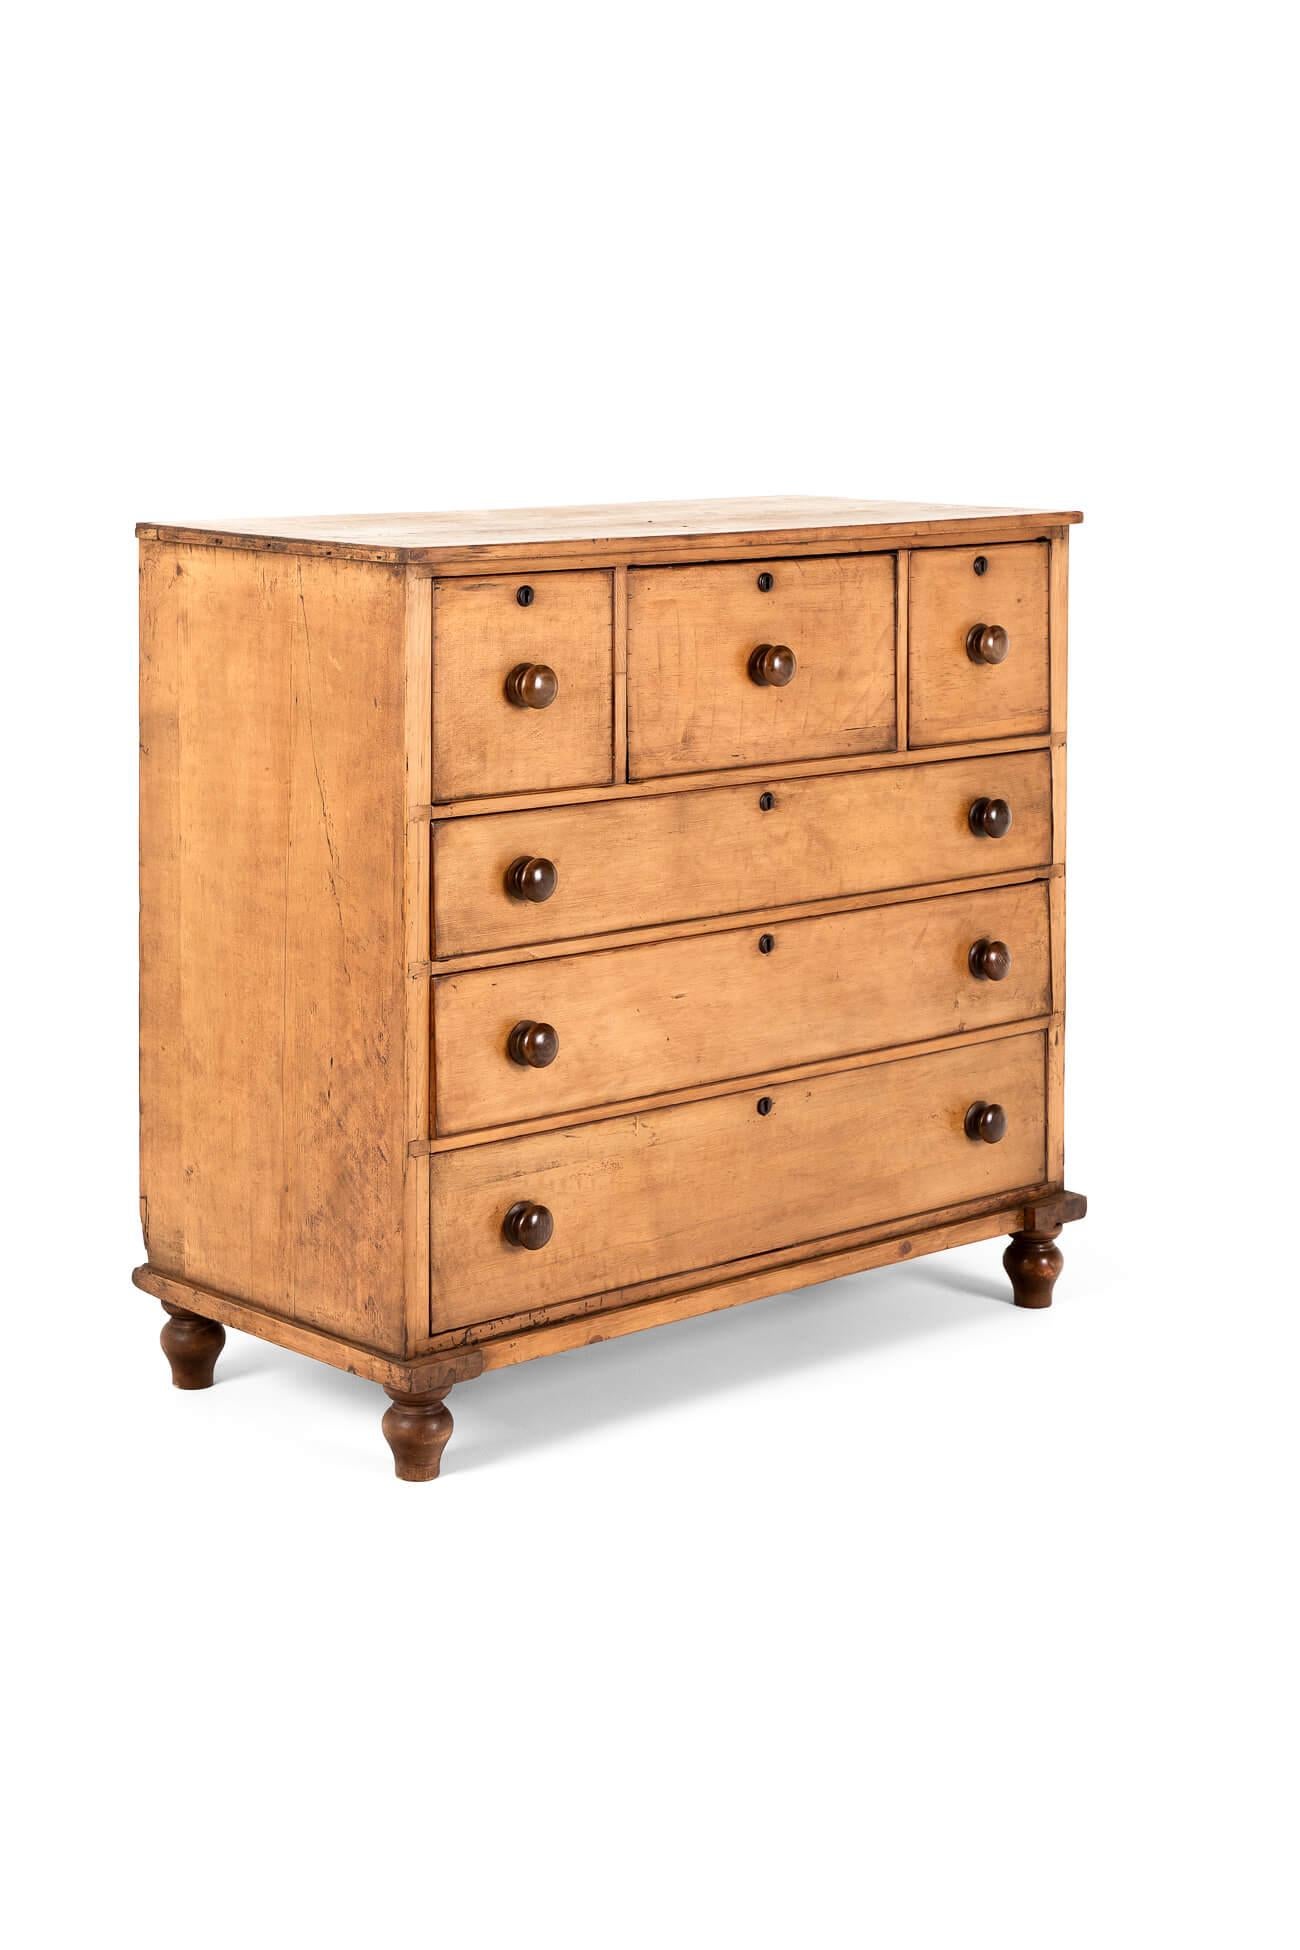 A commanding chest of Victorian drawers in pine.

Featuring a generous top over three spacious hat drawers with three graduating drawers beneath coupled with original drawers knobs and brass escutcheons.

The drawers have their original pitch pine